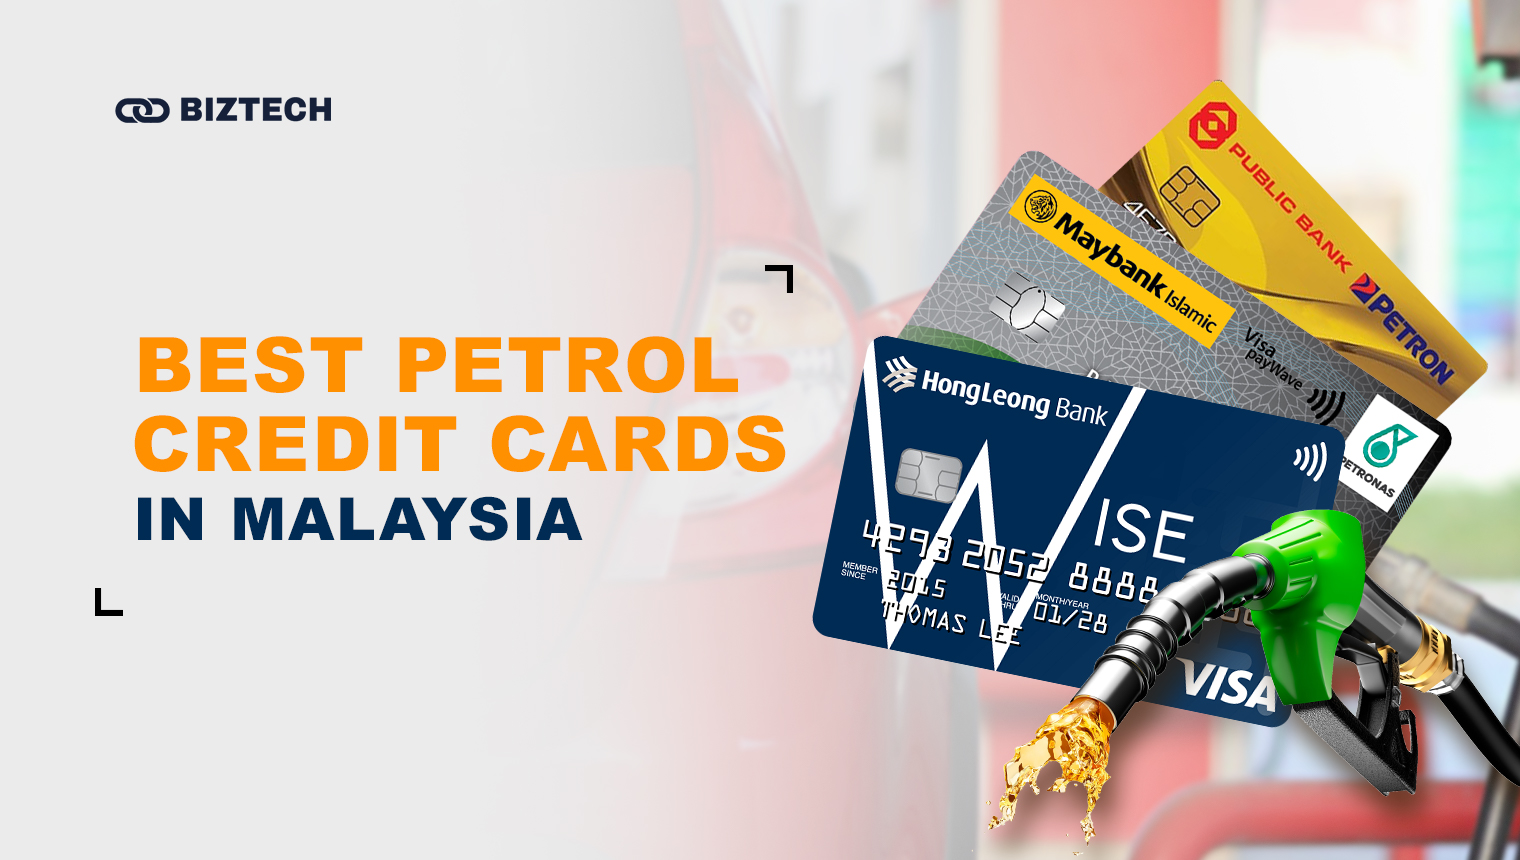 Best petrol credit cards in malaysia